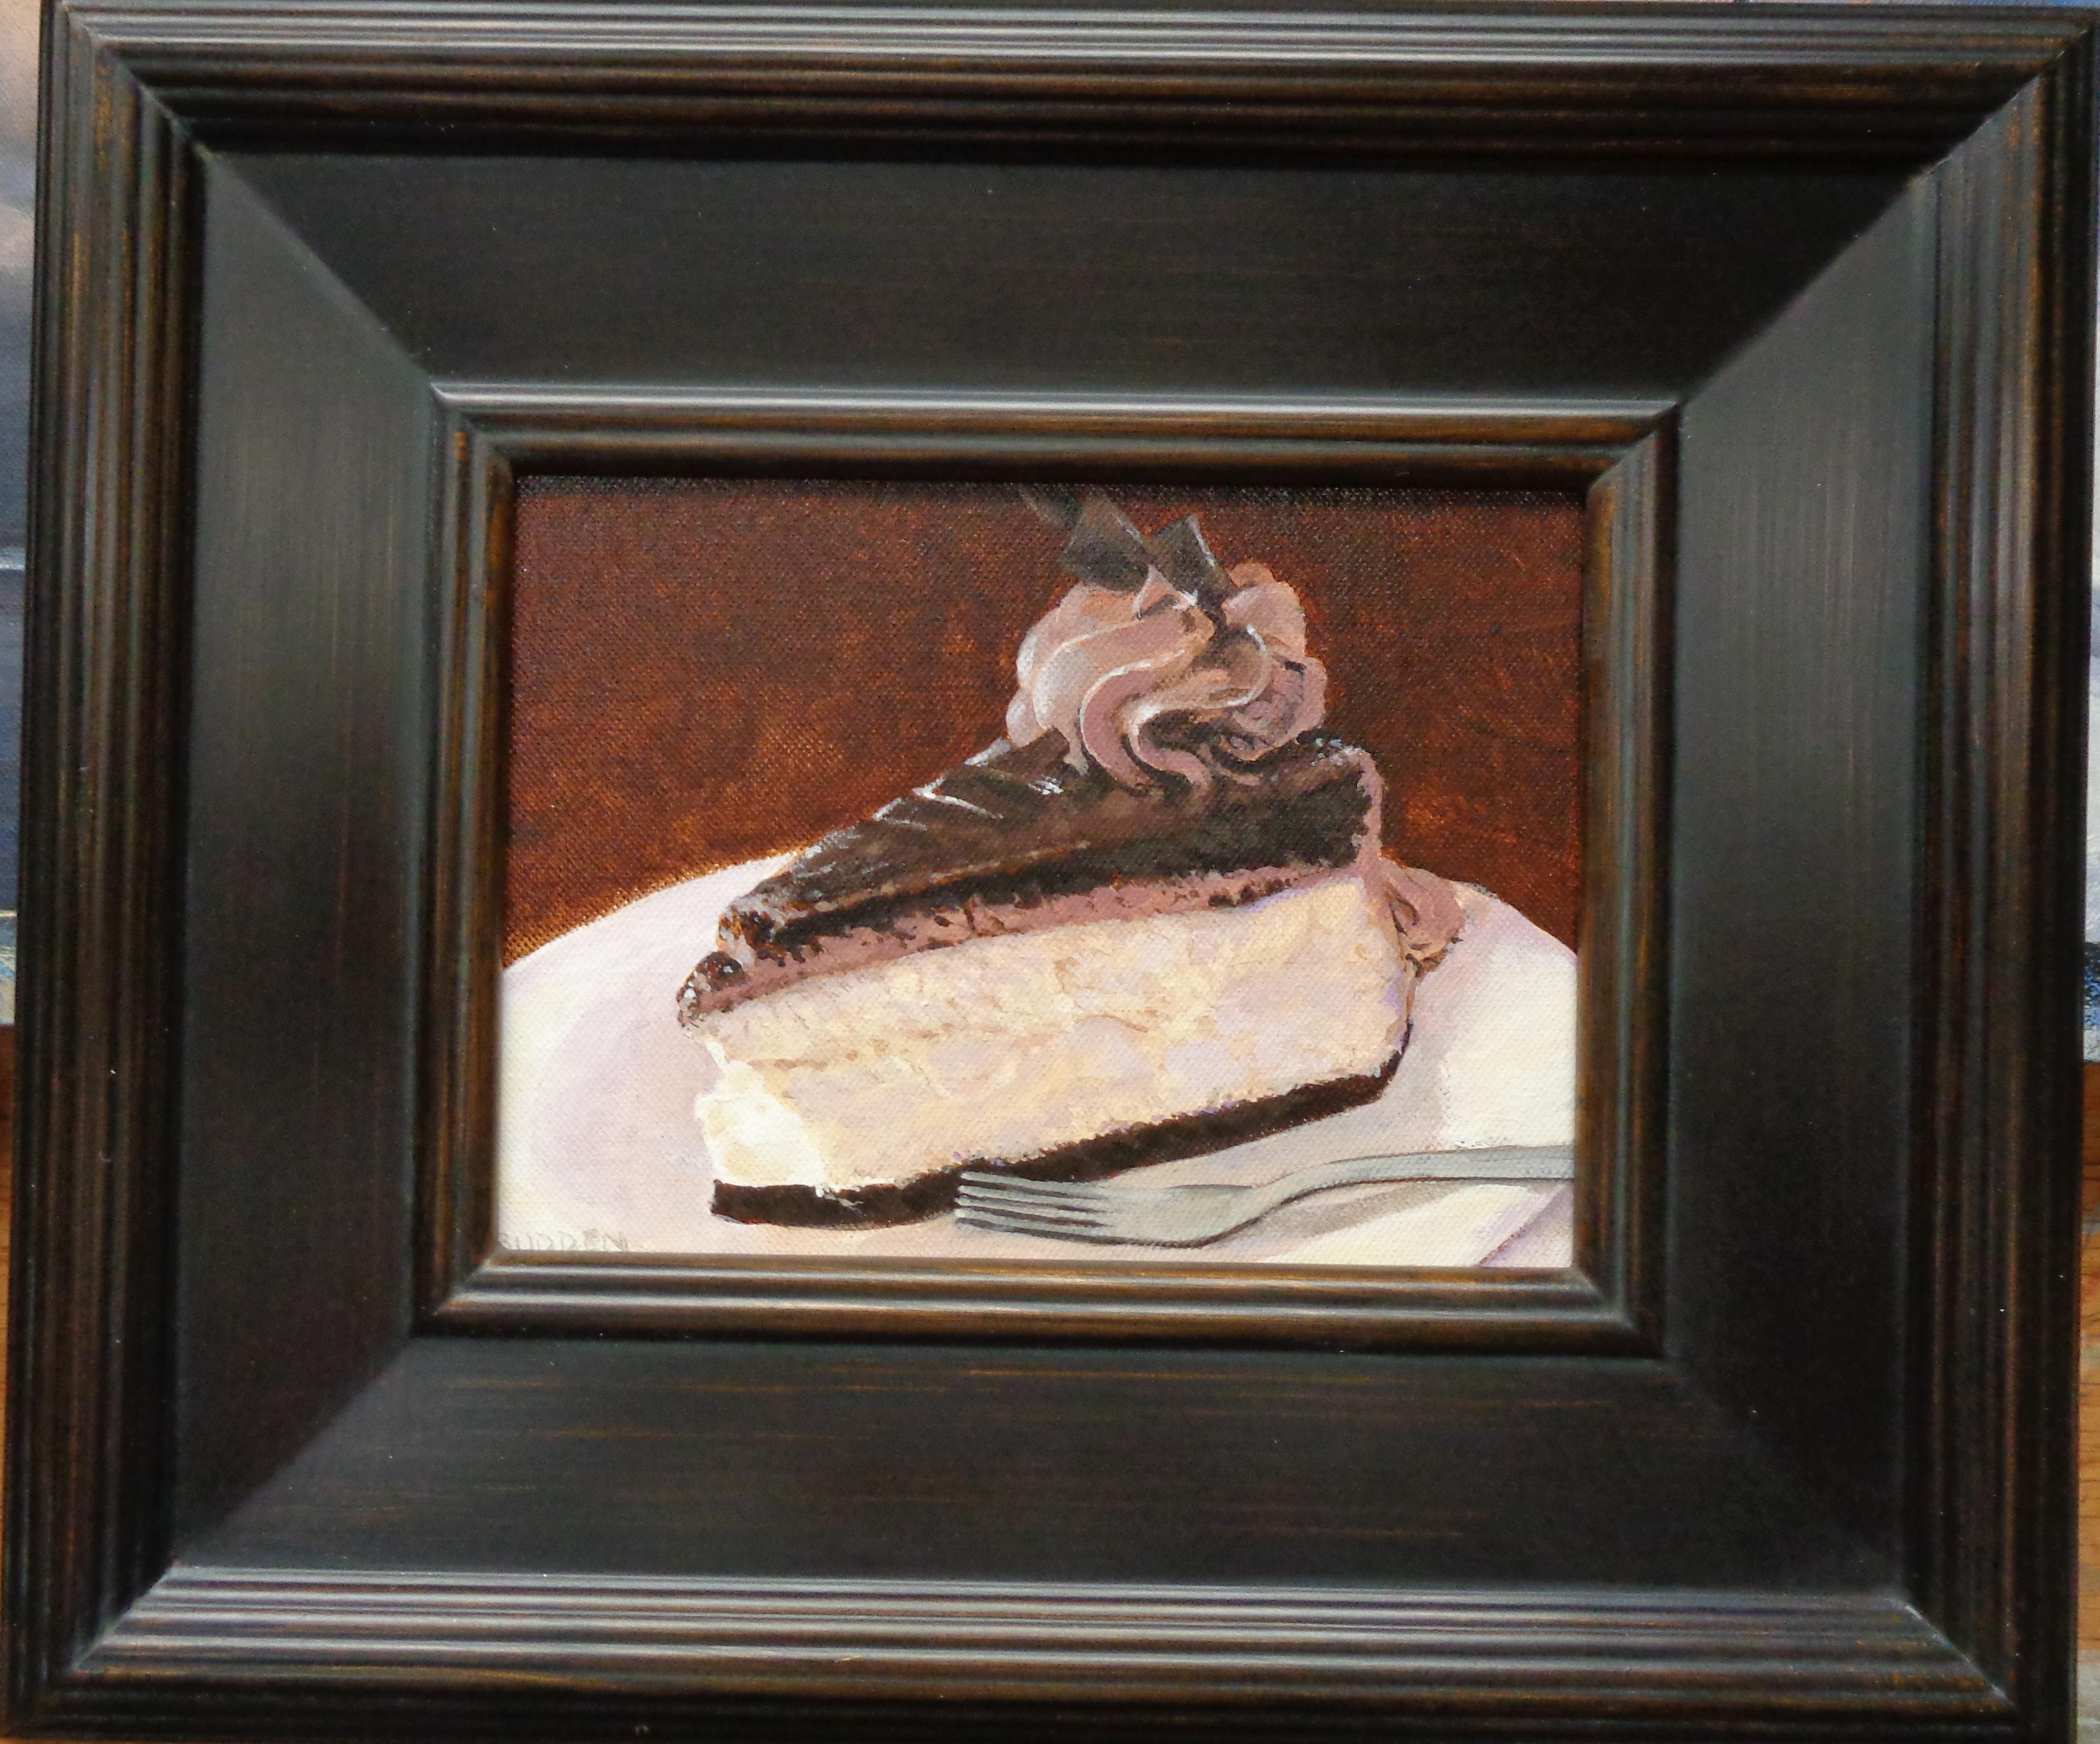 Dessert Painting by Contemporary Artist Michael Budden Chocolate Cheesecake